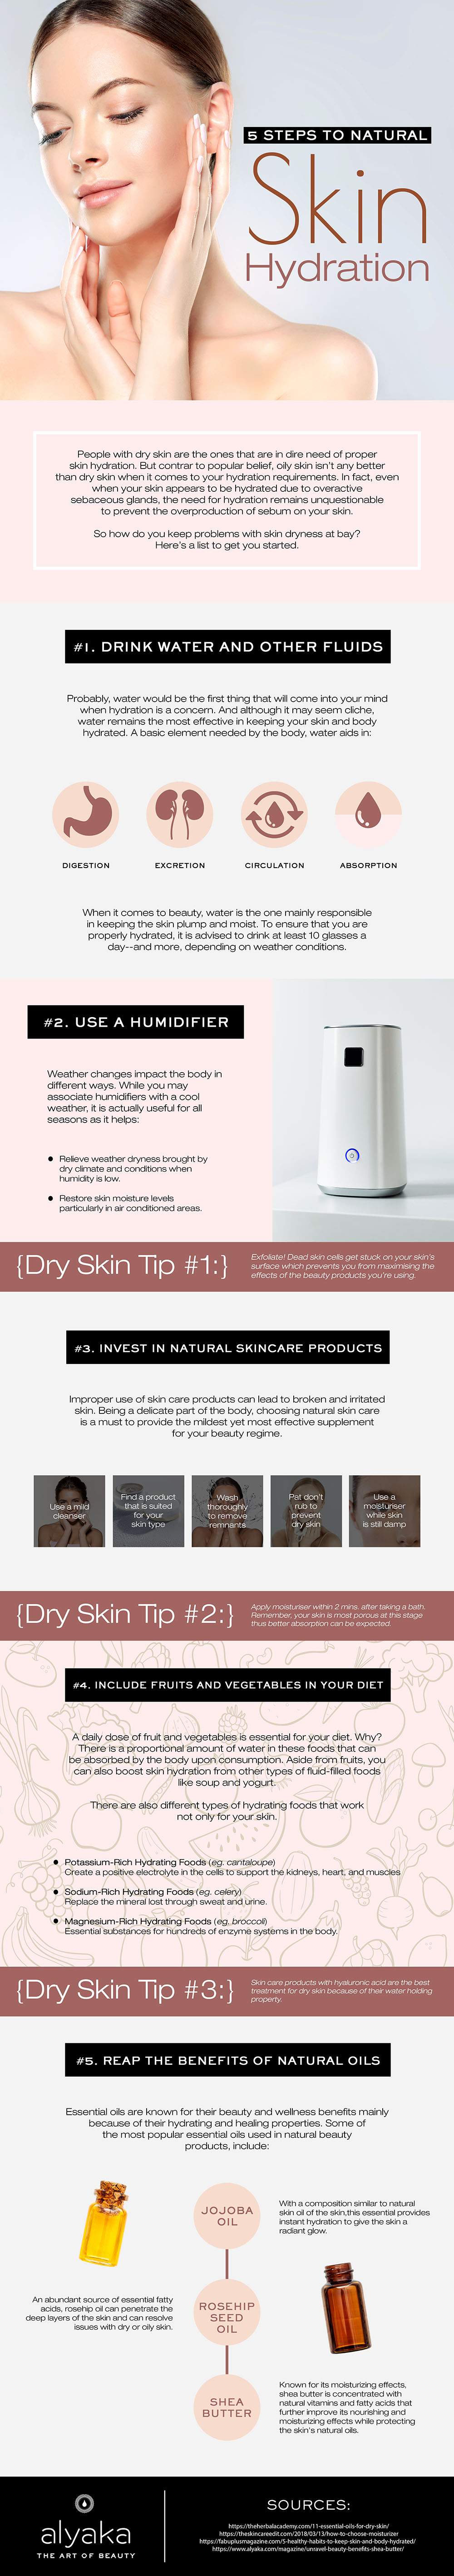 5-Steps-to-Natural-Skin-Hydration